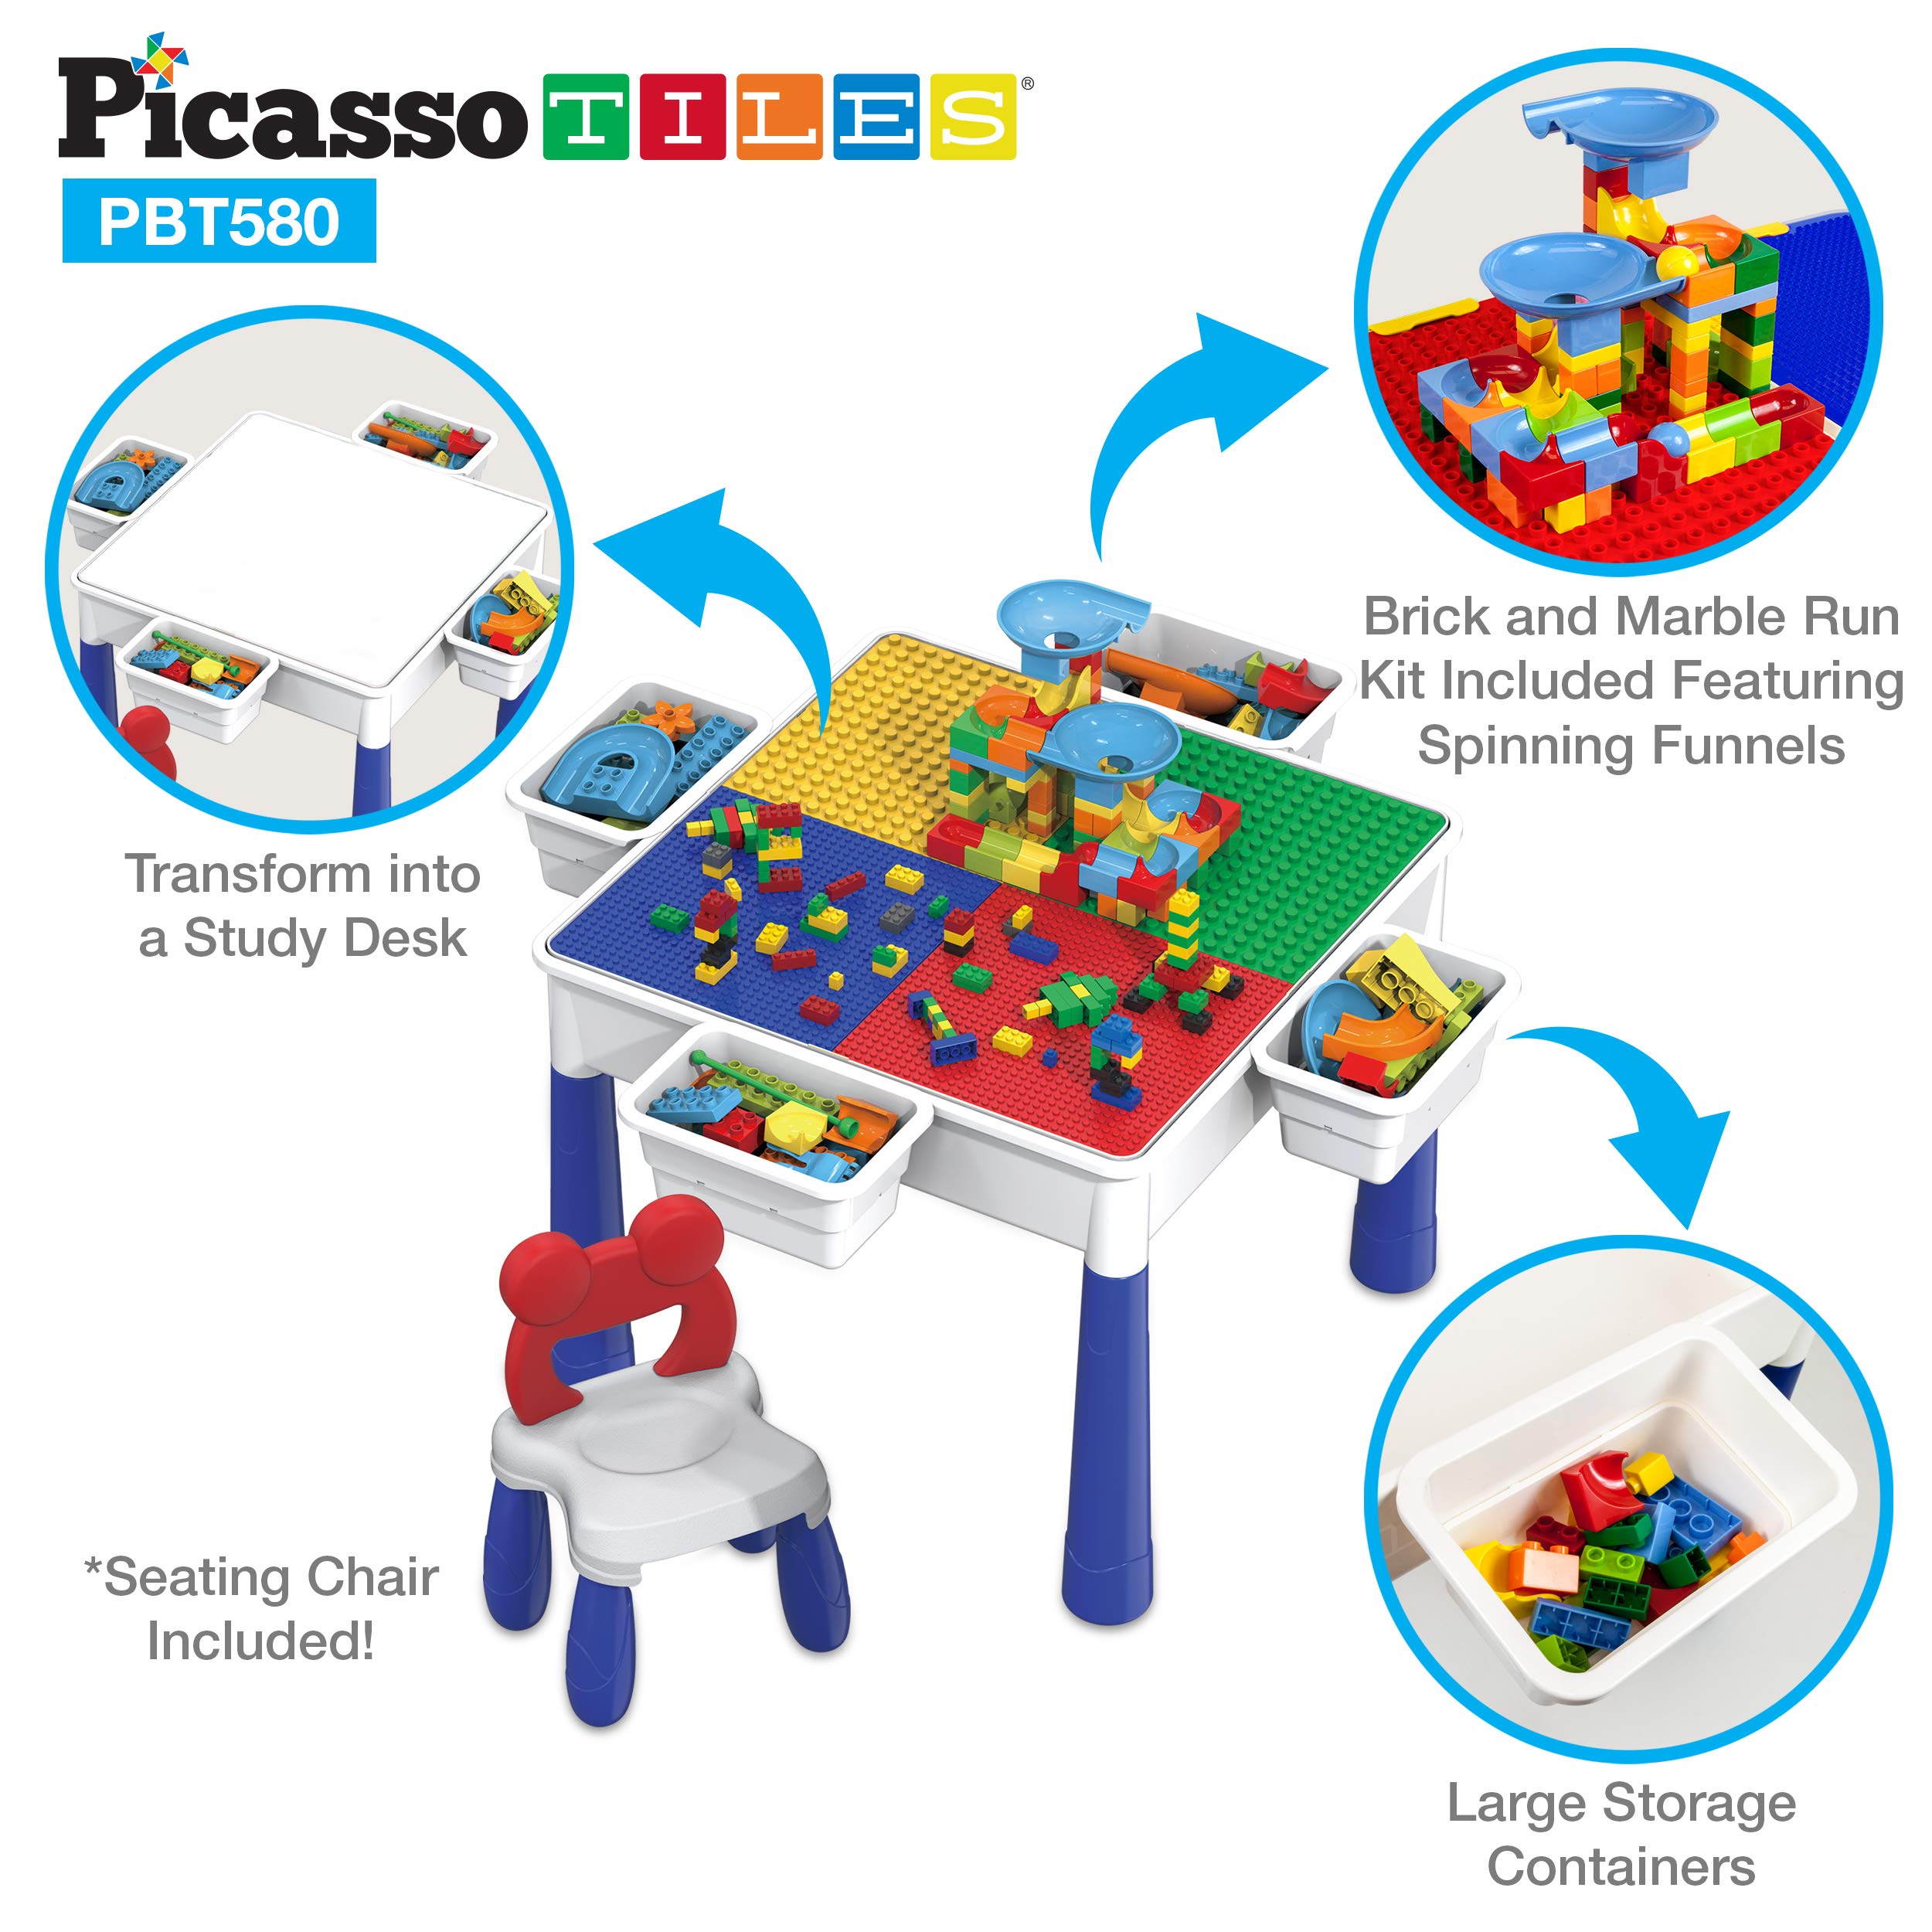 PicassoTiles Magnetic Drawing Board + Table & Chair Set with Storage, 12x10 inch Large 748 Bead Magnet Tablet Pad Erasable Reusable Writing Playboard, All-in-1 581pcs Building Blocks and Marble Run